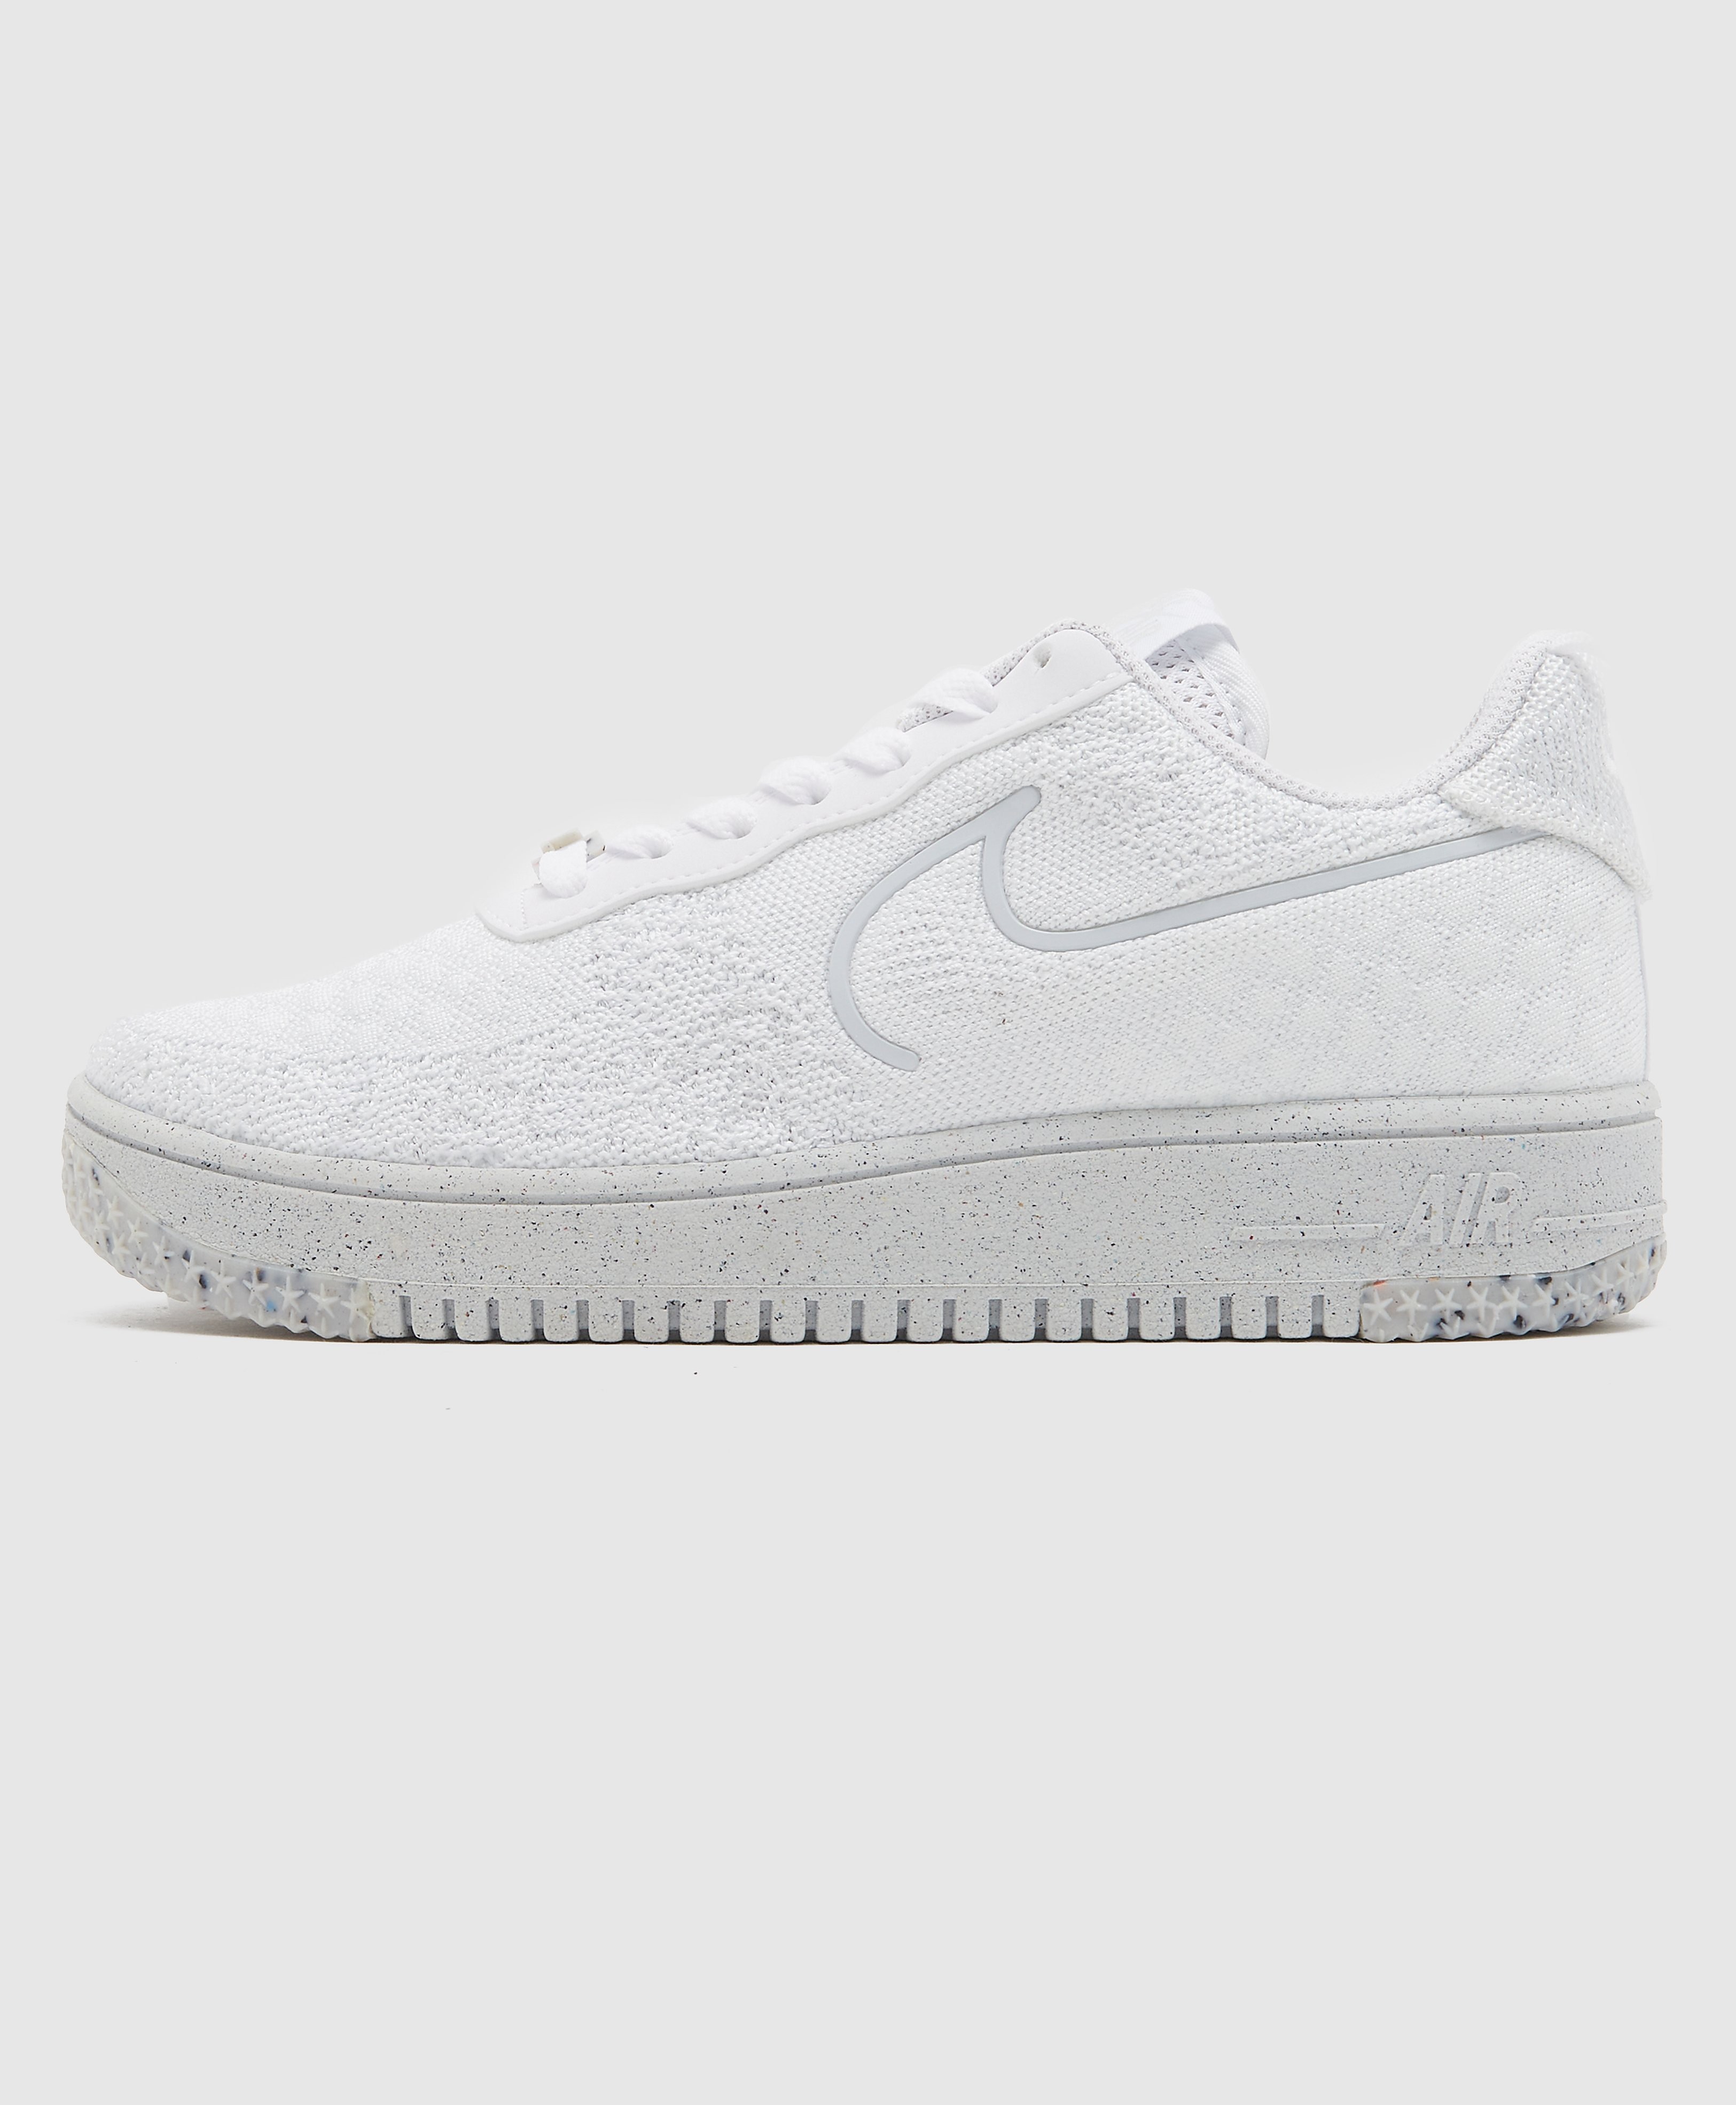 Nike Men's Air Force 1 Crater Flyknit Trainers - White, White